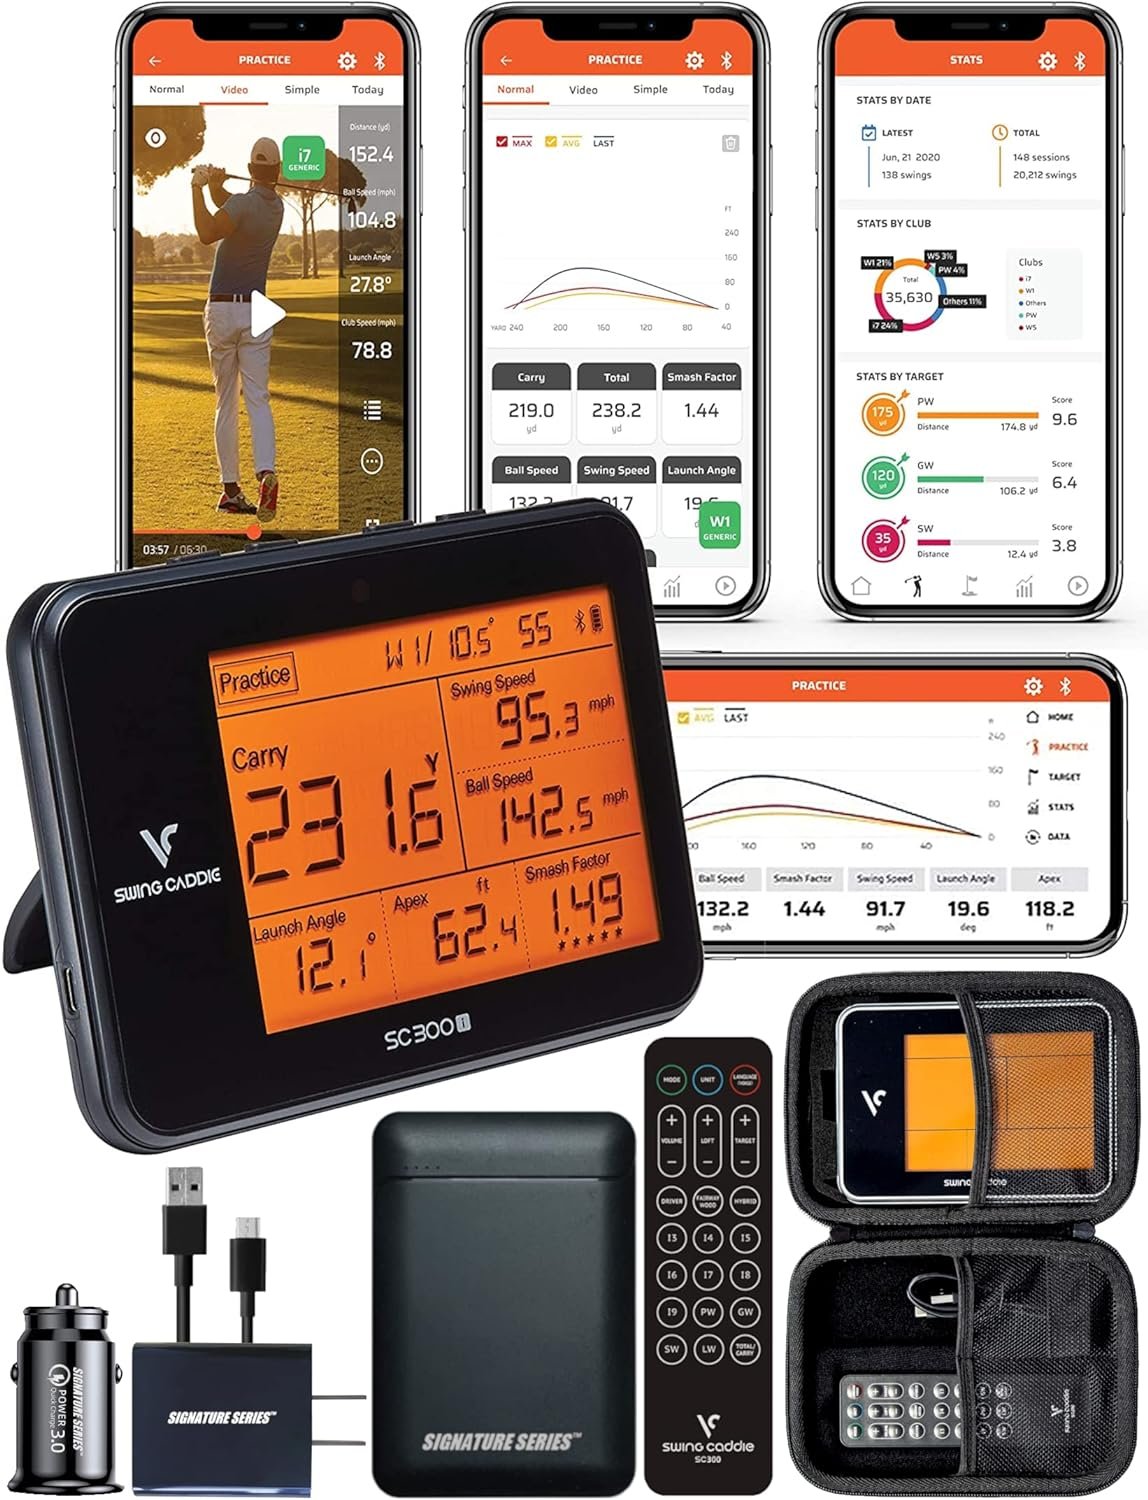 Voice Caddie SC300i Swing Caddie Portable Golf Launch Monitor | Doppler Radar Technology with Carry, Total Distance, Ball  Swing Speed, Launch Angle, Max Height with Signature Series Charger Bundle